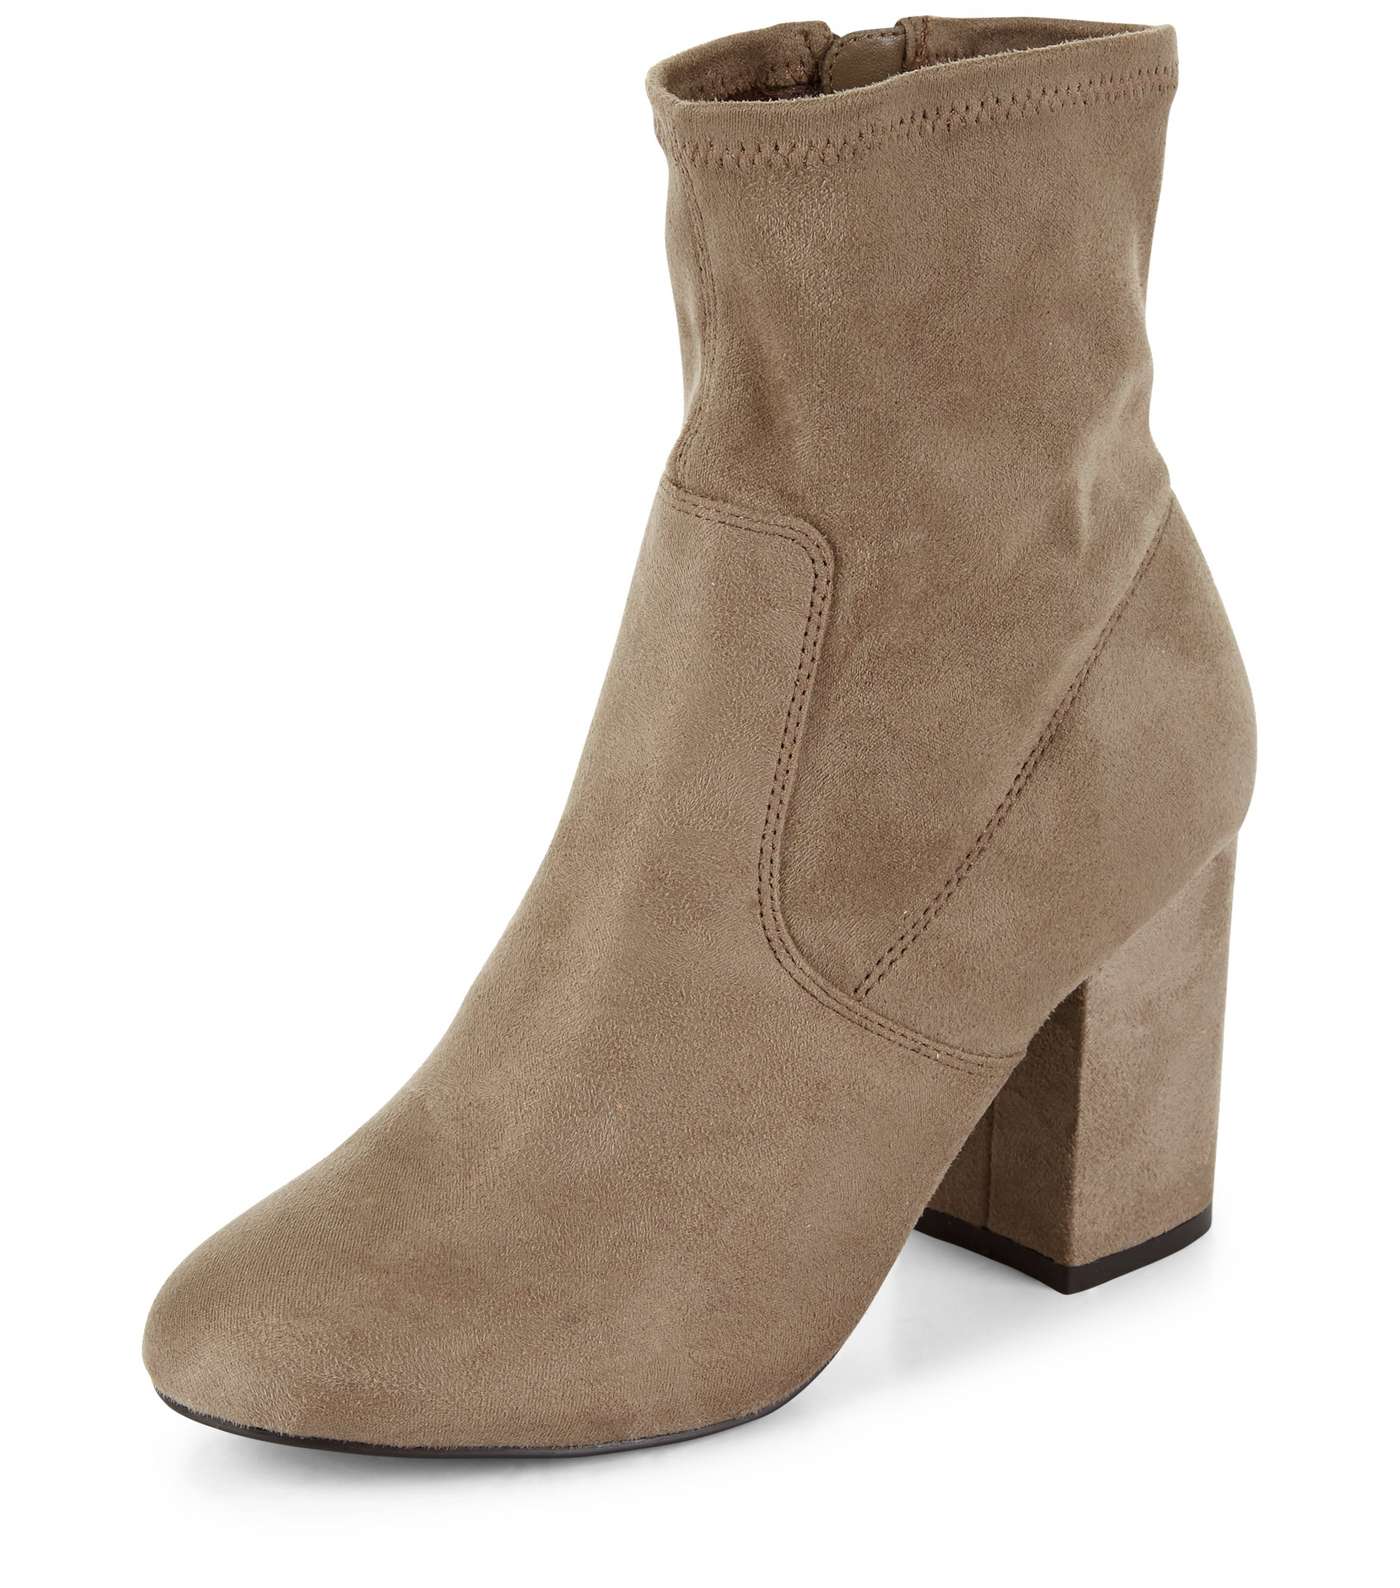 Grey Suedette Block Heel High Ankle Boots  Image 5